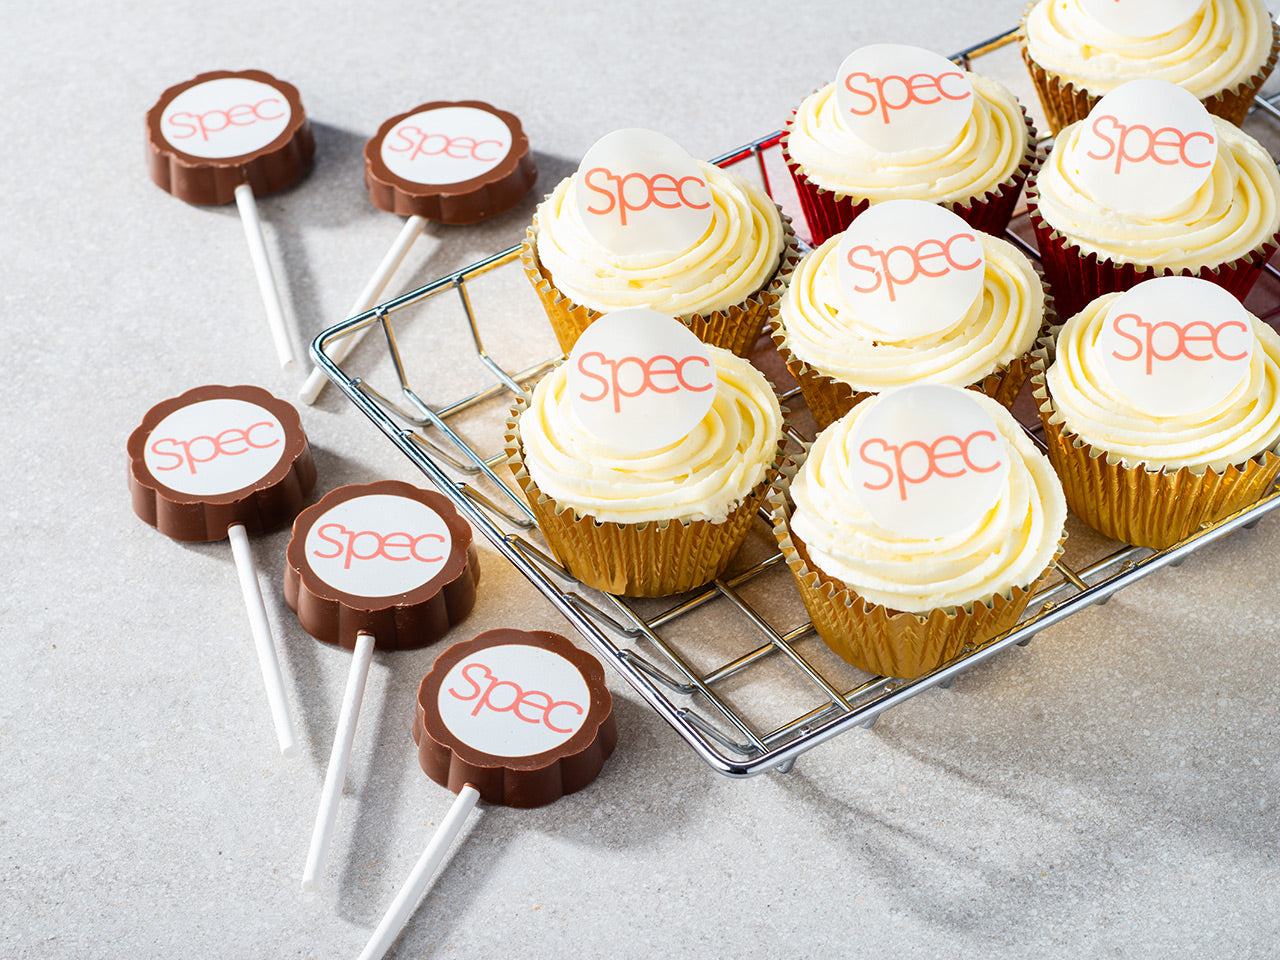 Selection of cupcakes and chocolate lollypops with brand names on top